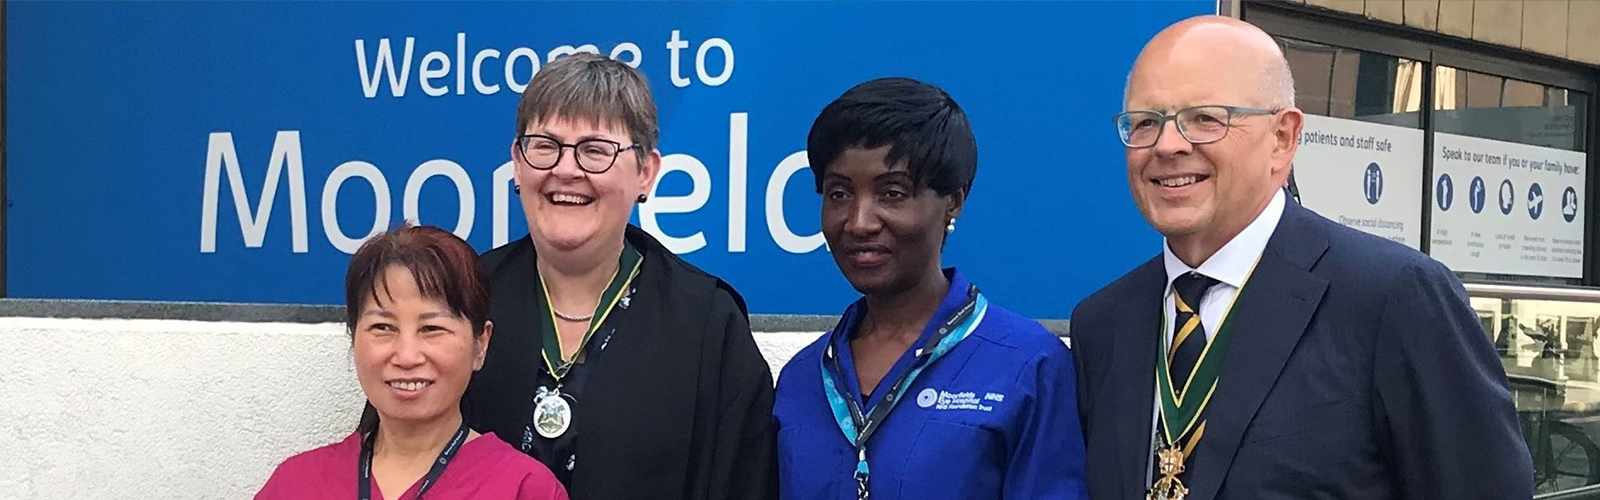 Image shows the Company Master and Clerk outside the entrance to Moorfields Eye Hospital, welcoming two nurse specialists as members of the Company. One nurse was born in Uganda, the other in China. Both have worked in the UK for over 20 years.